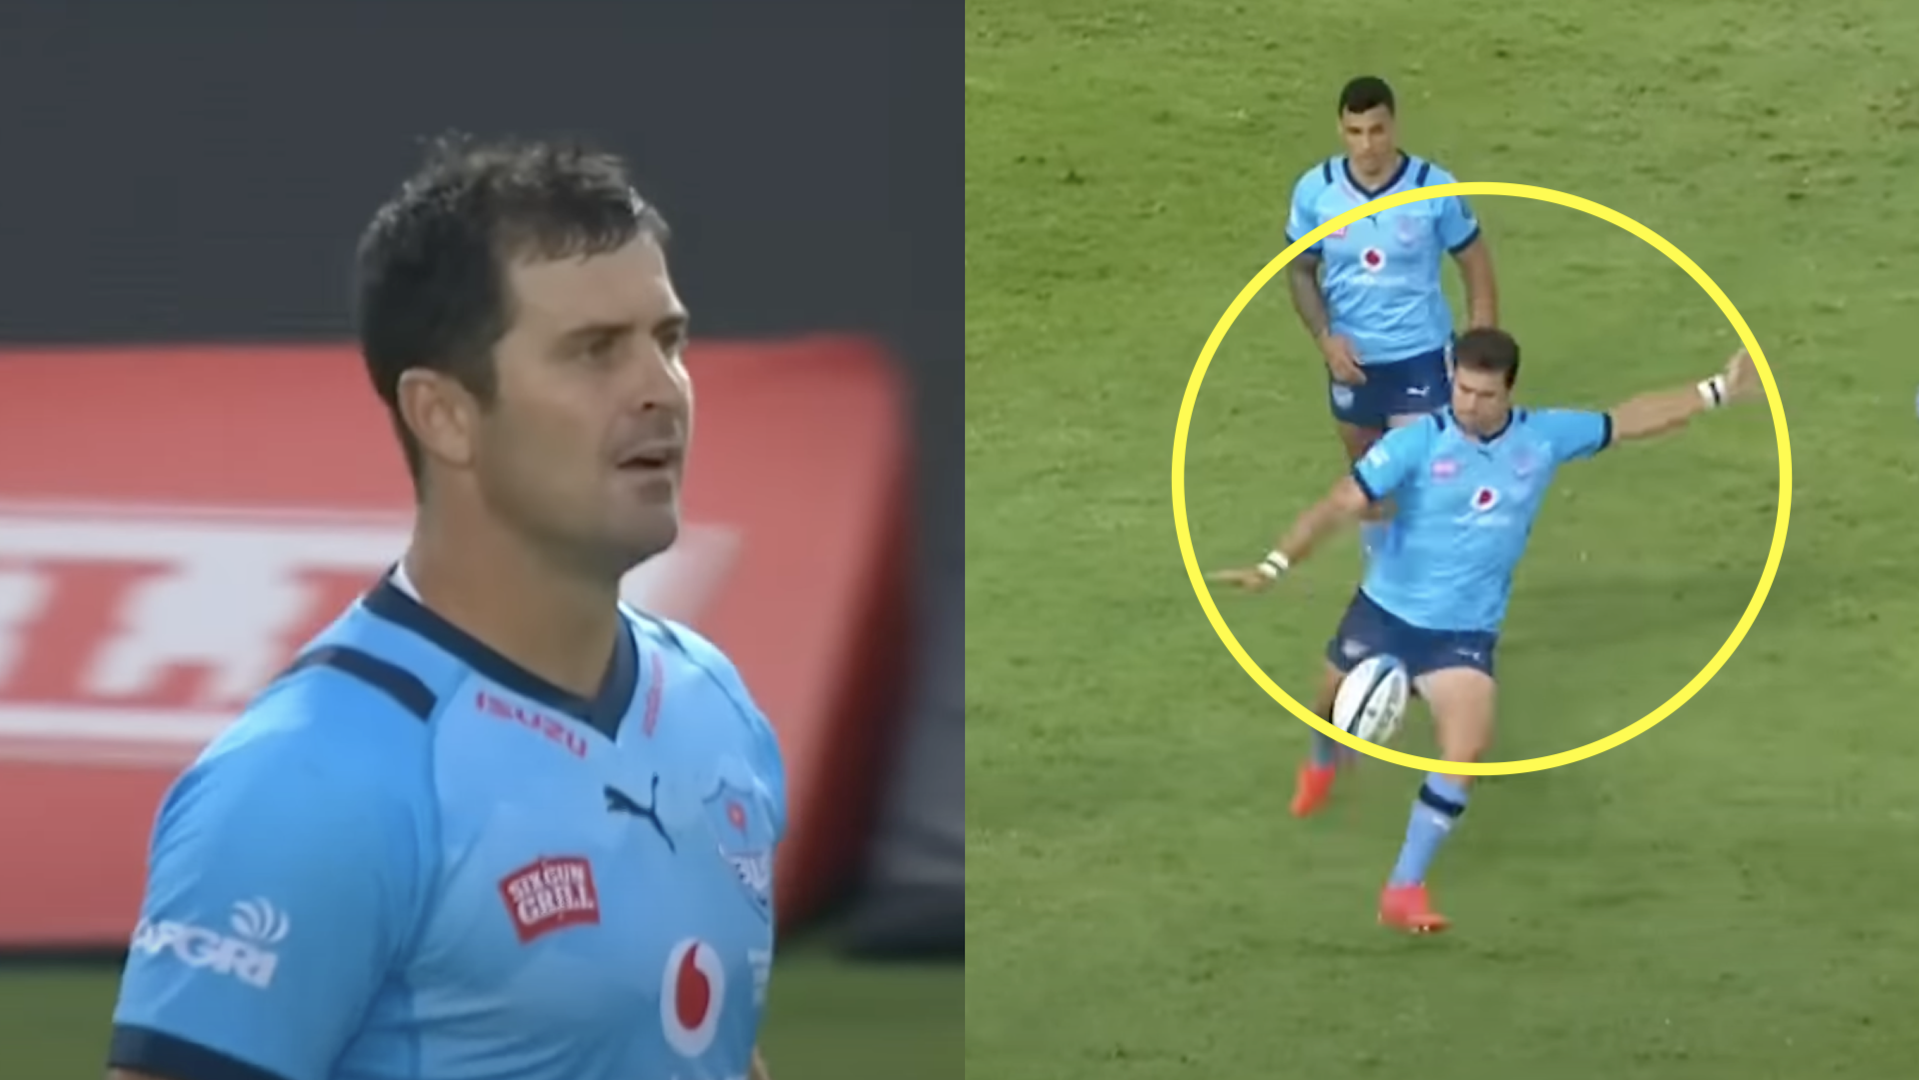 Review needed as Morne Steyn makes a mockery of the 50:22 rule